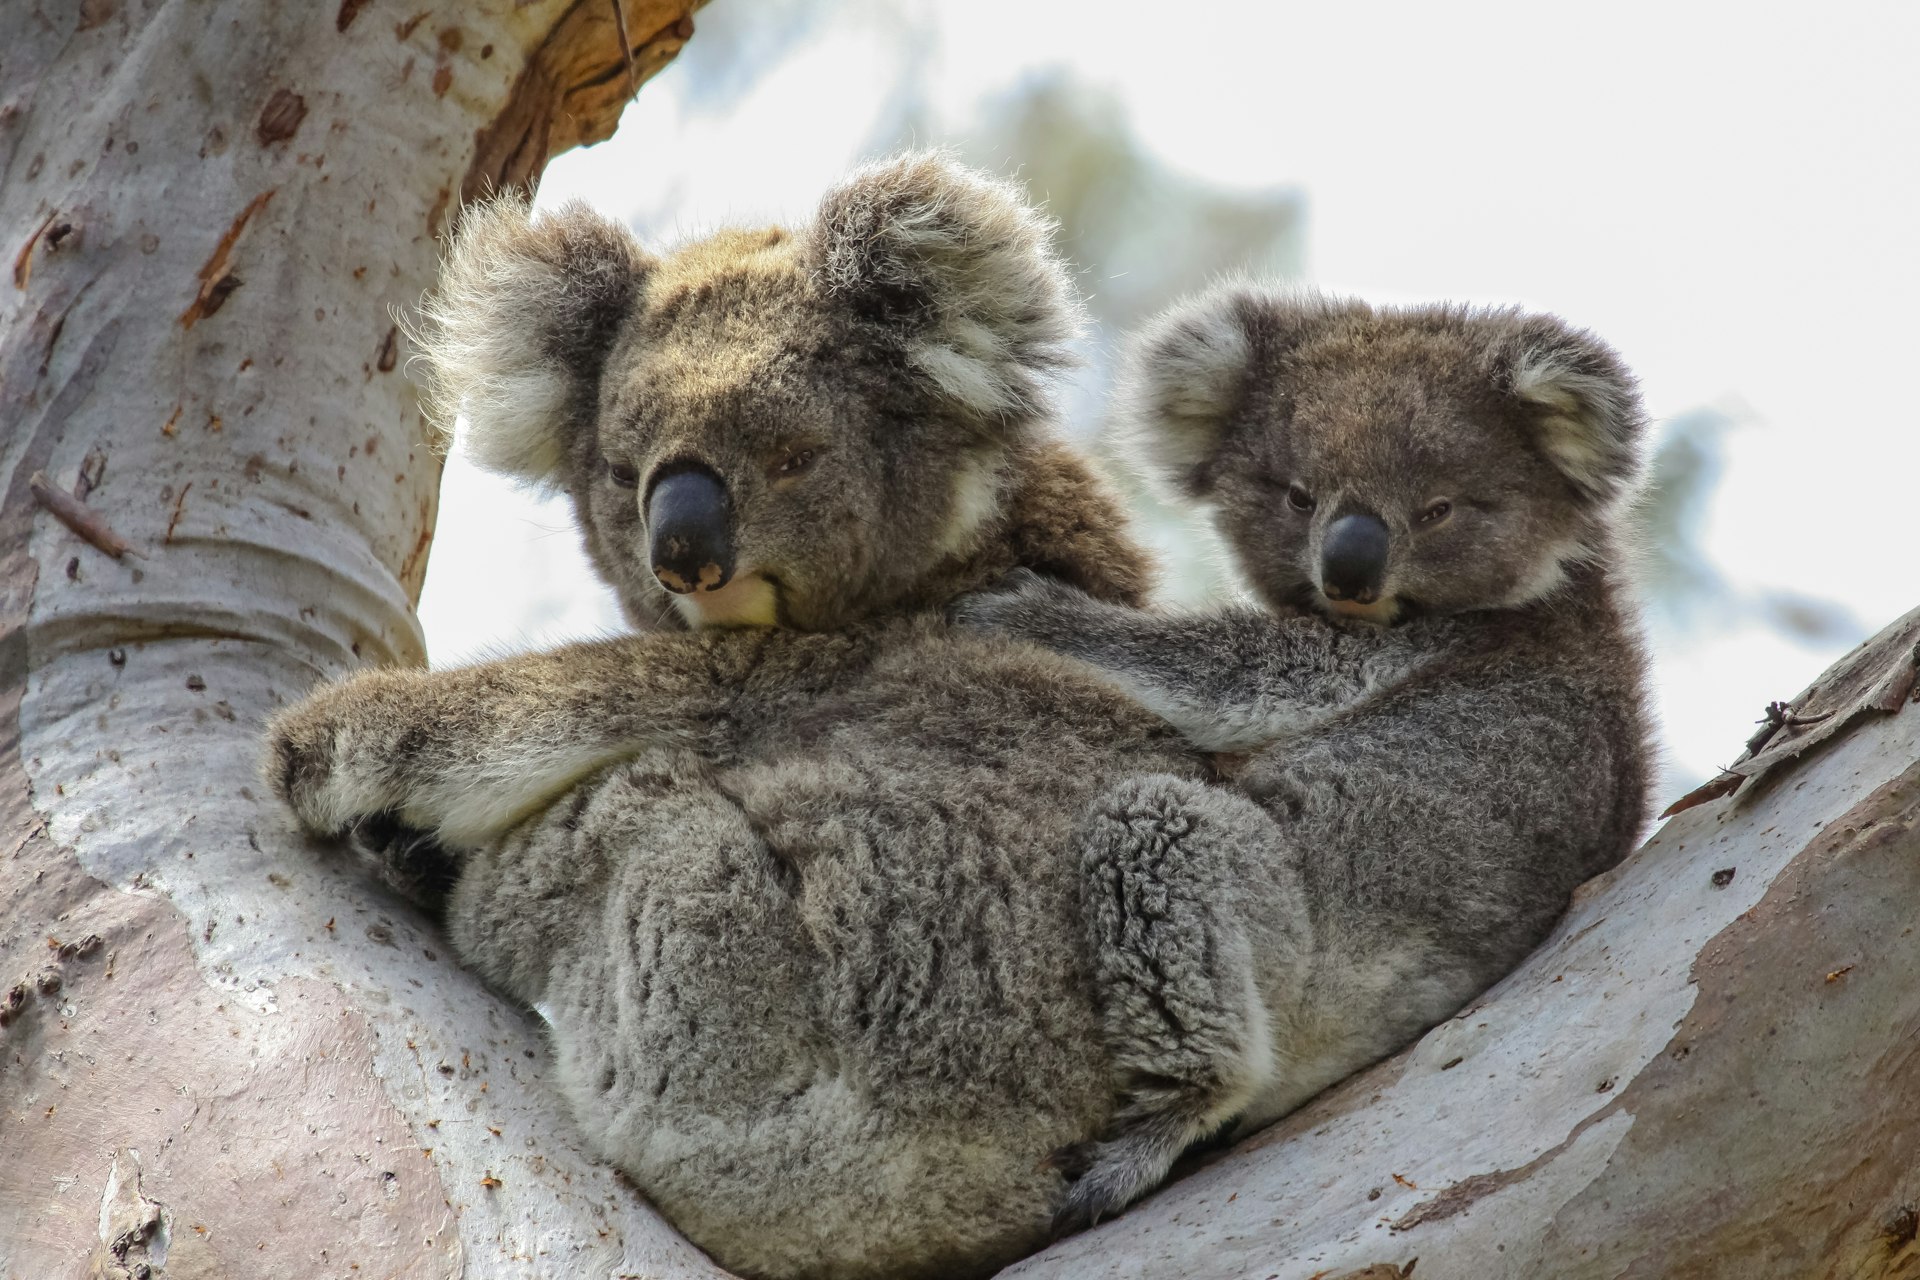 Koala mother with baby joey on its back sitting in a eucalyptus tree